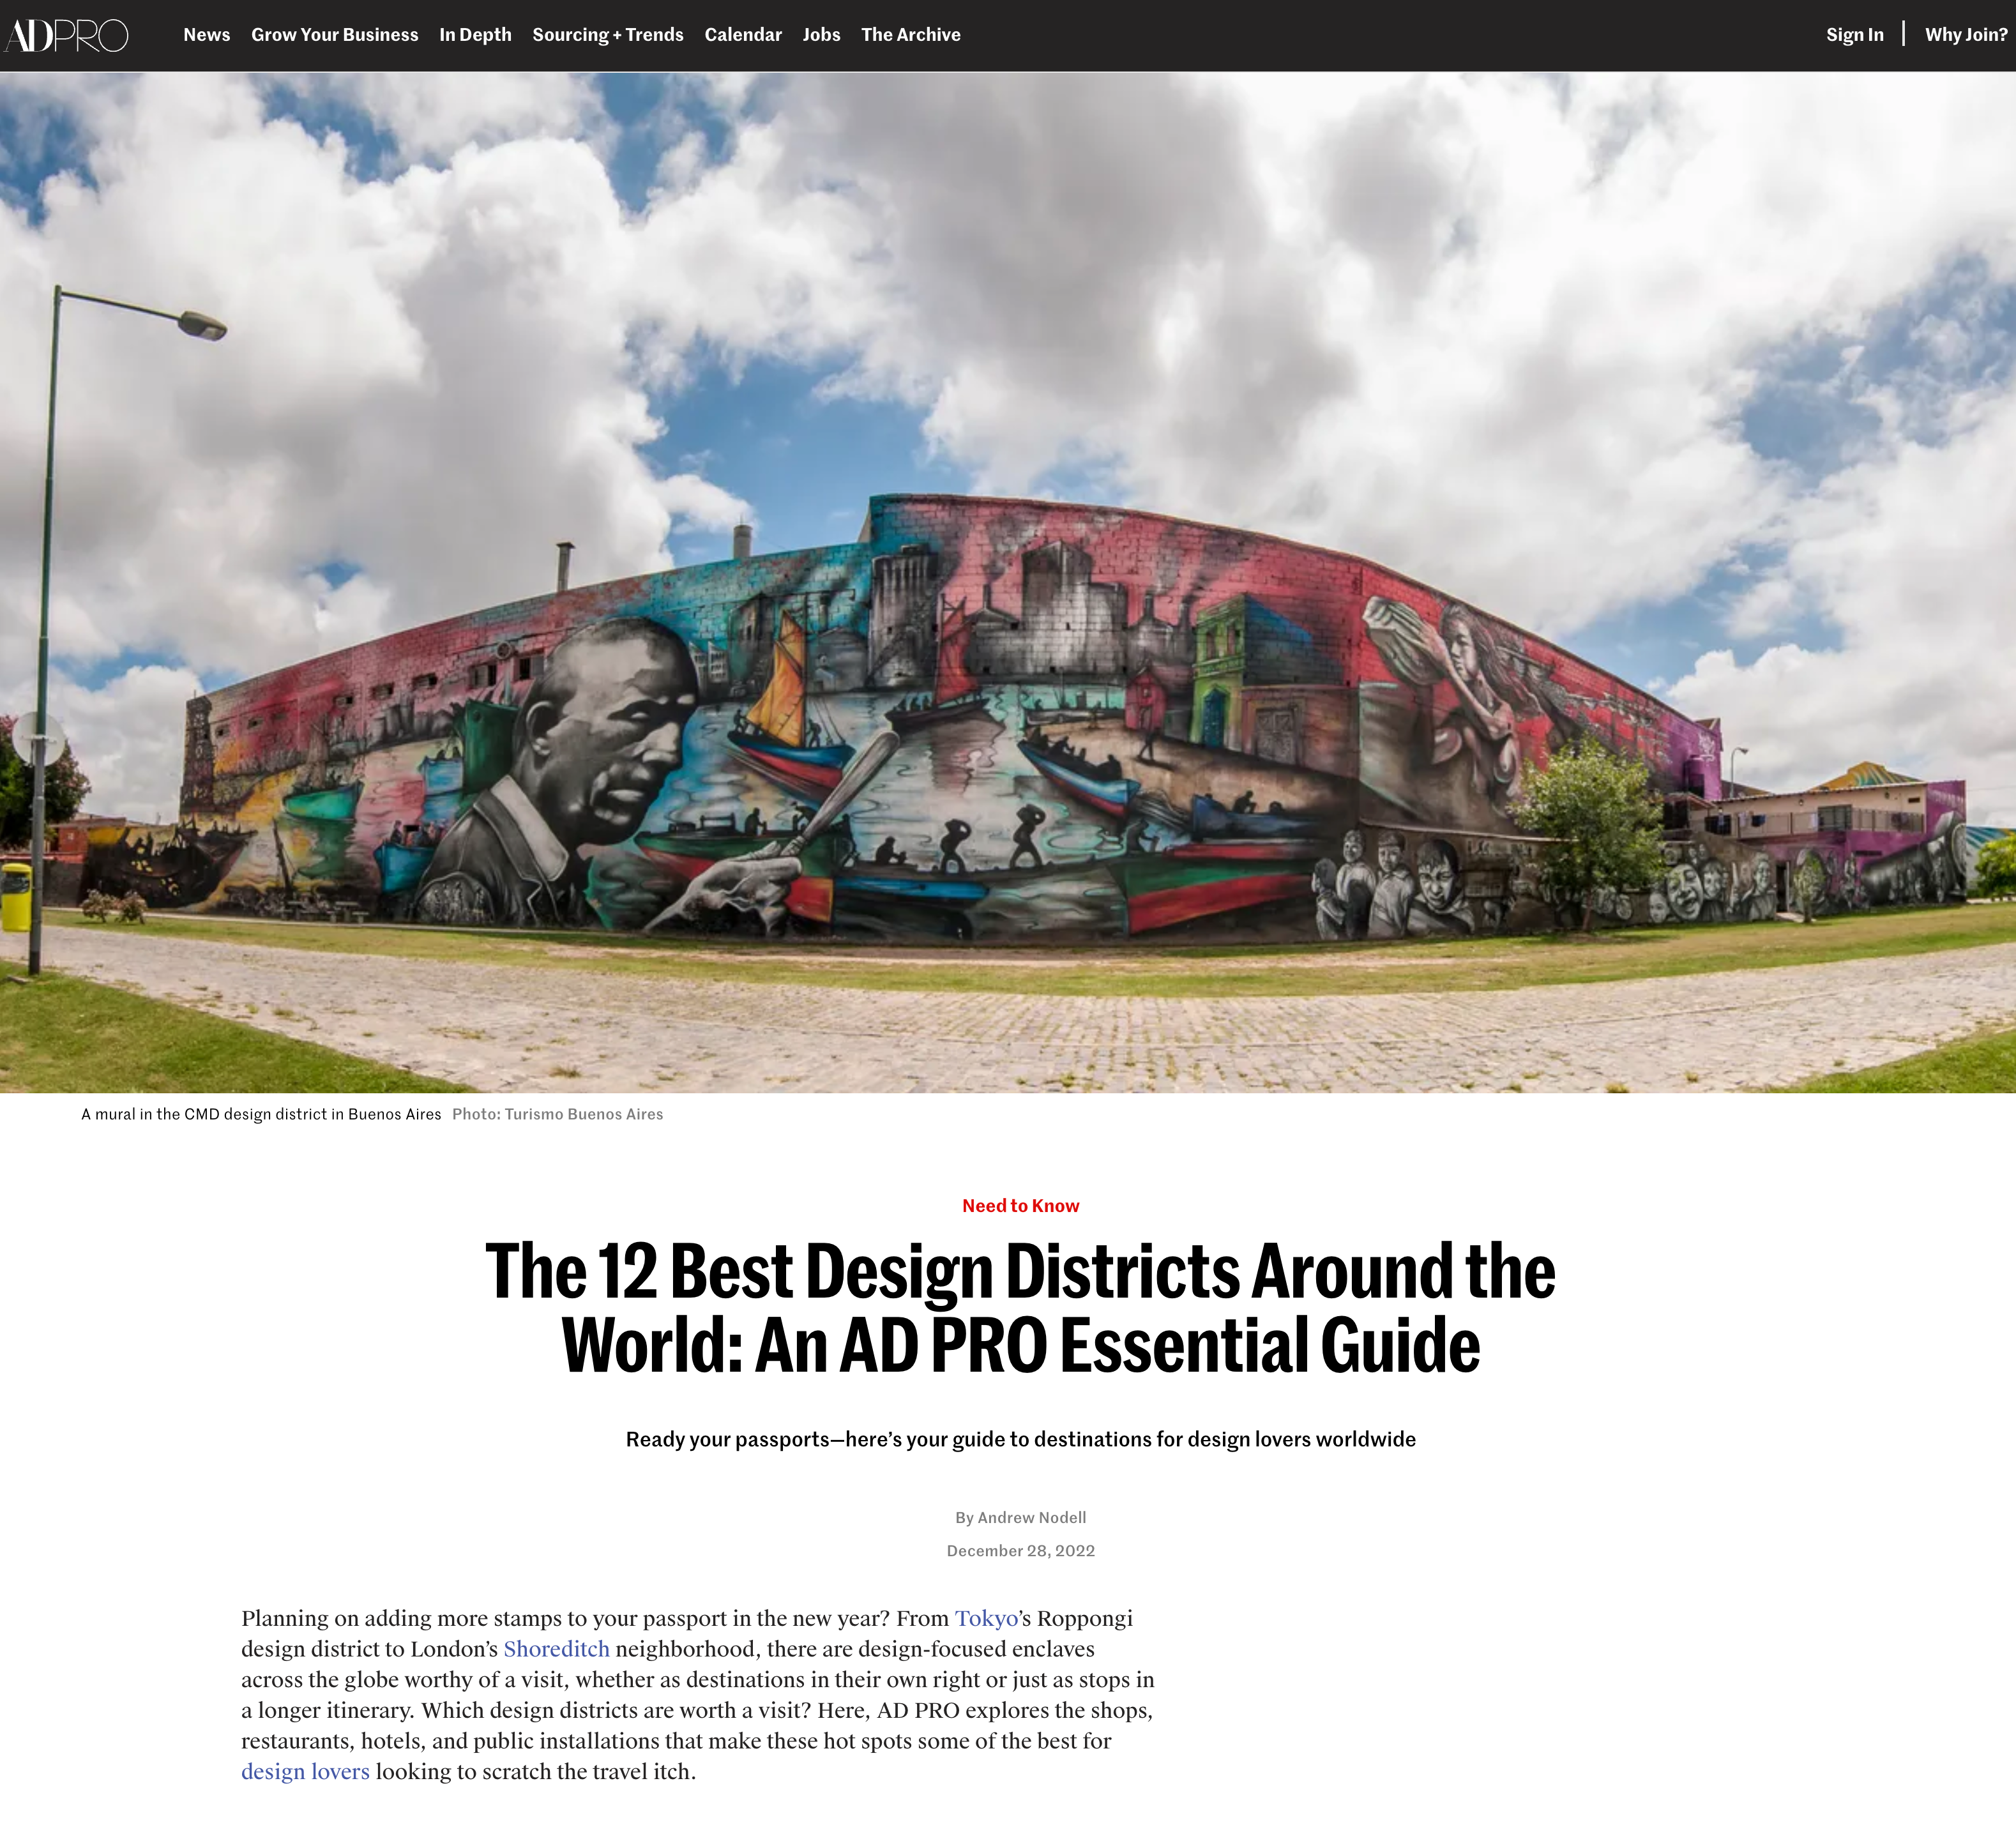 The 12 Best Design Districts Around the World: An AD PRO Essential